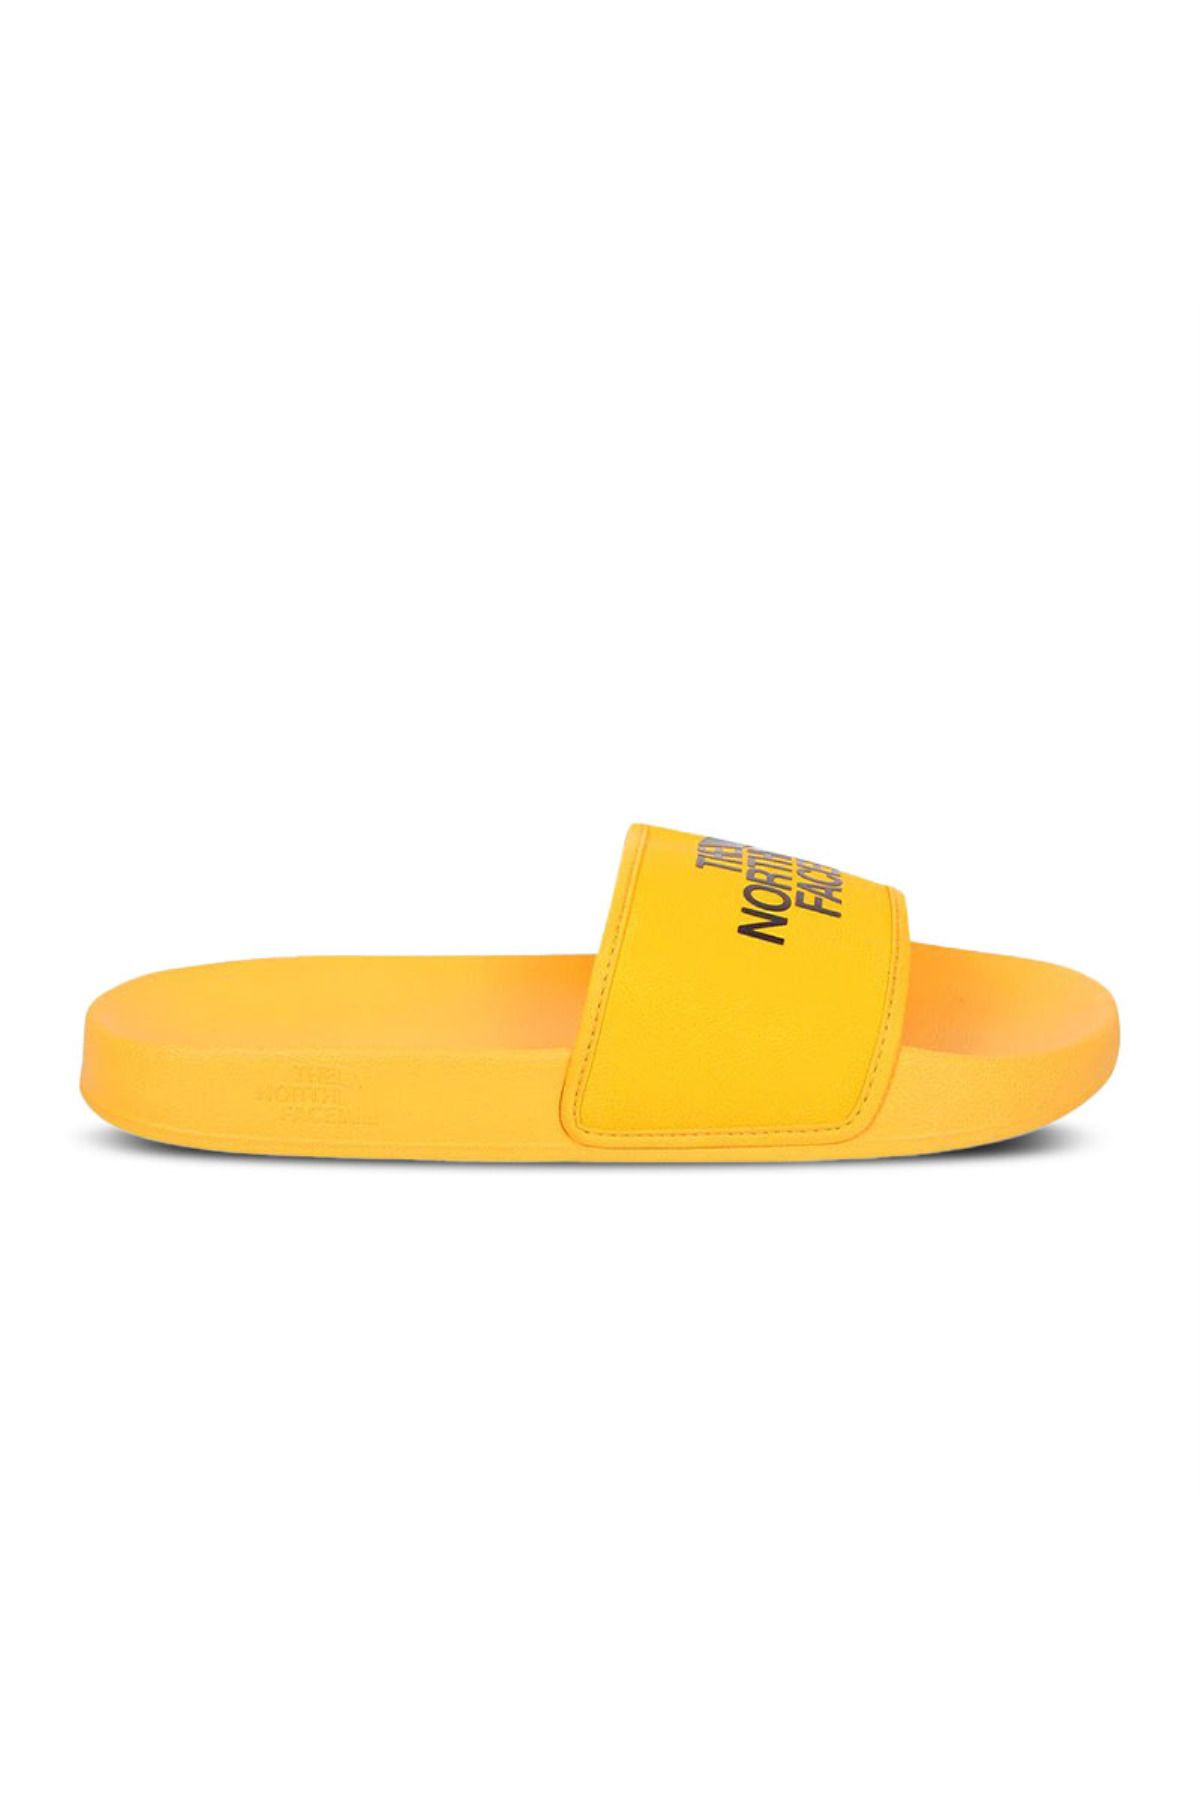 The North Face M Base Camp Slide Iii